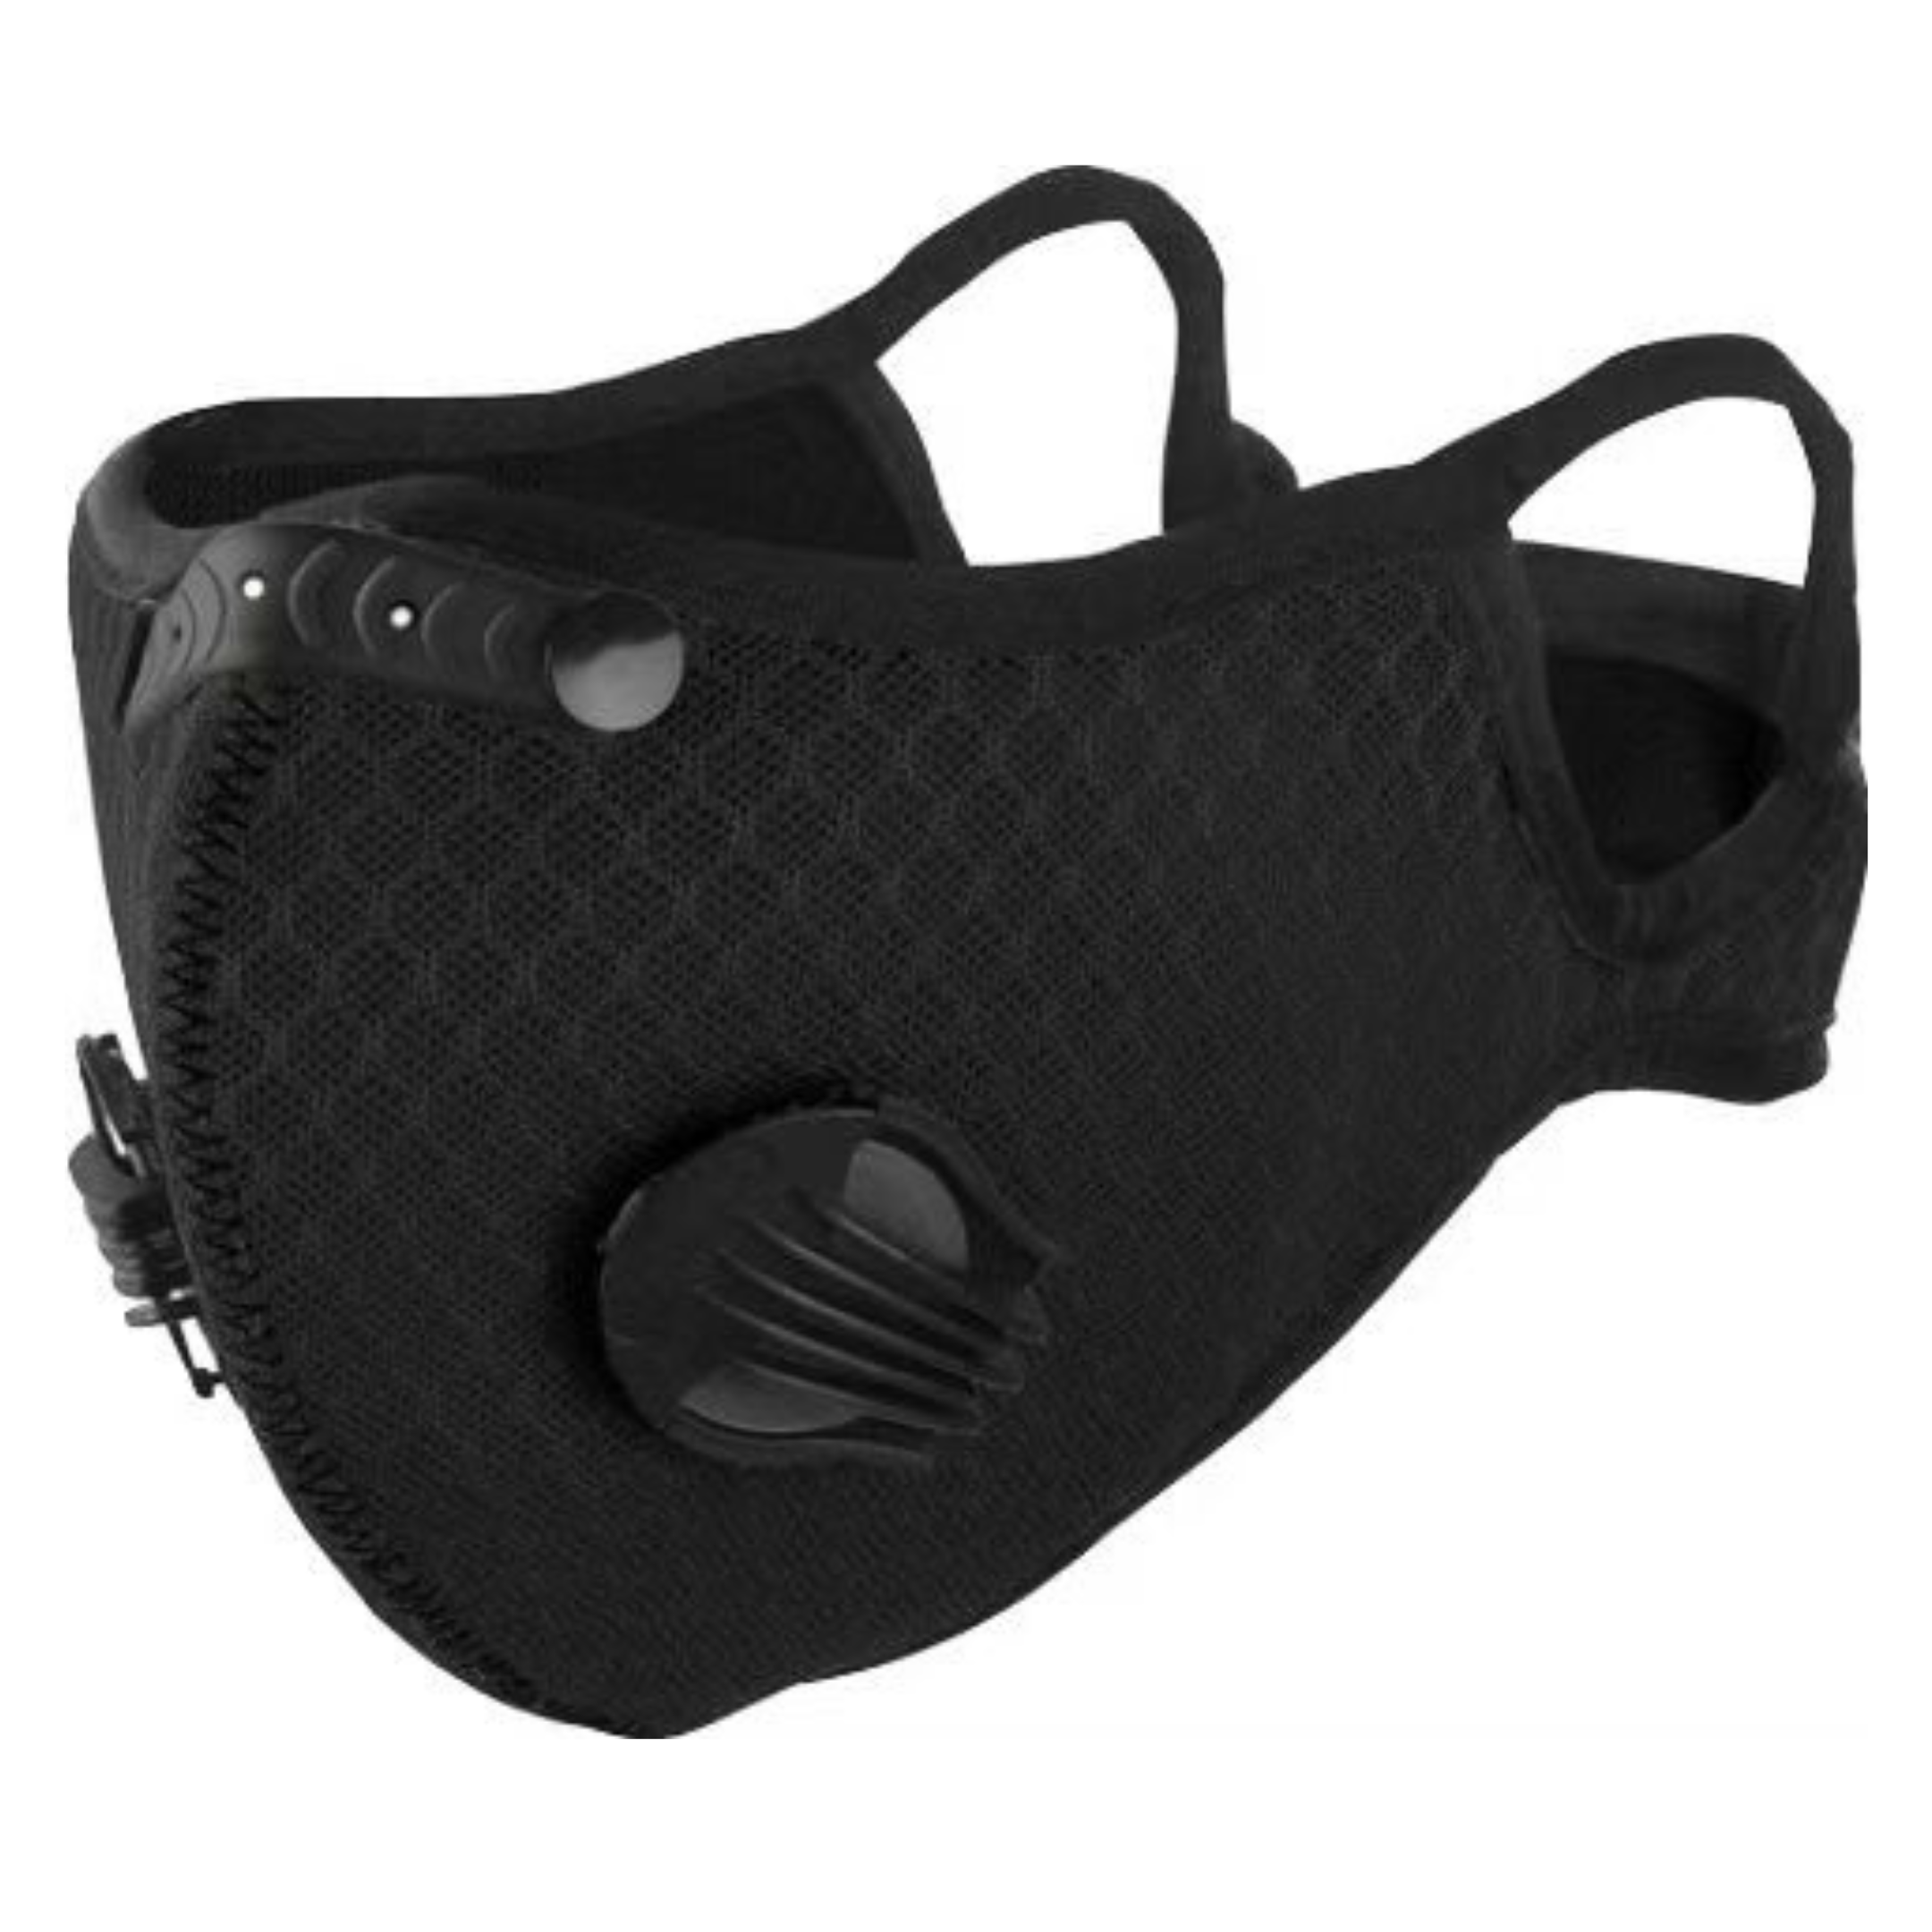 Black Dust Mask with 3 Carbon Filters, One Size Fits Most